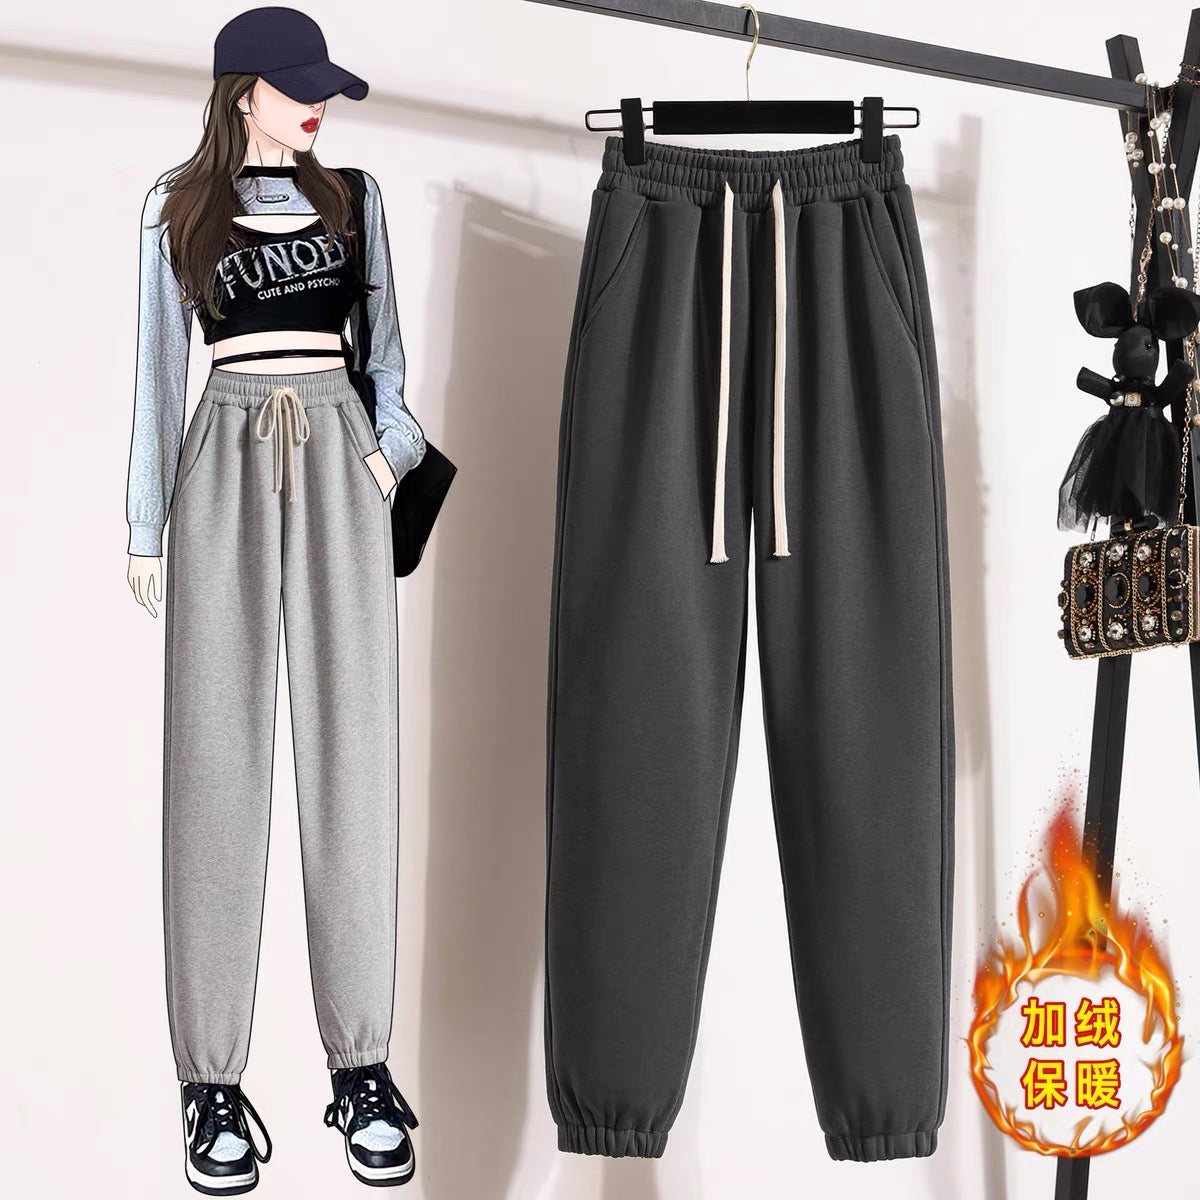 Grey sports pants women's loose-fitting casual pants 2022 new